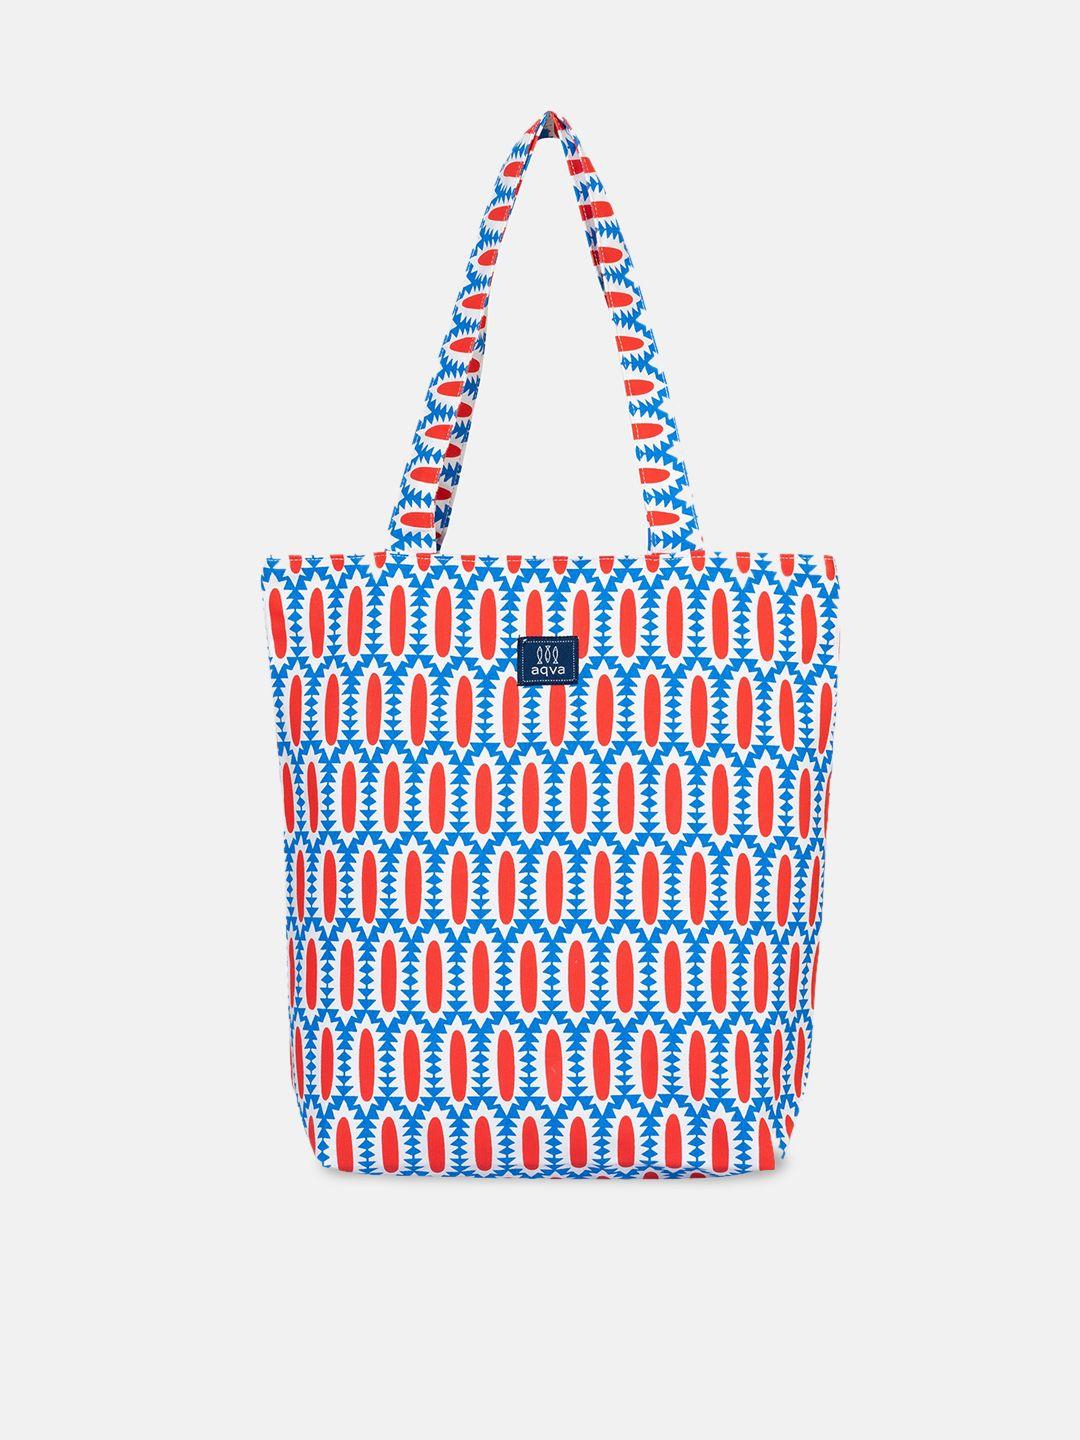 aqva turquoise blue geometric printed shopper tote bag with fringed